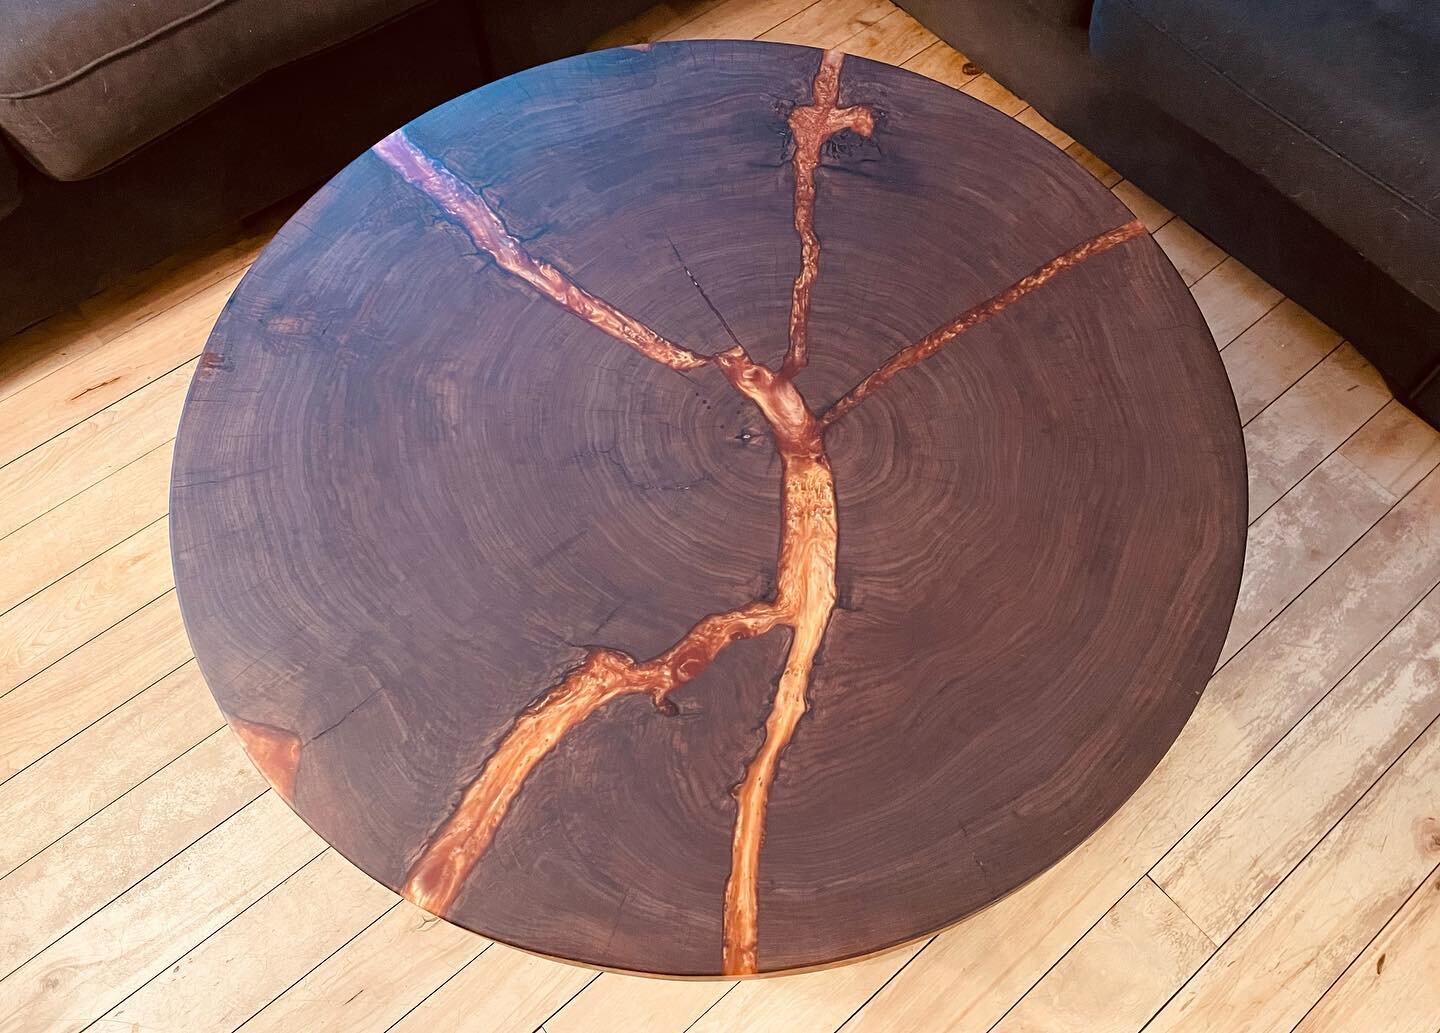 This piece of walnut comes from a horizontal cut through its tree trunk. It&rsquo;s diameter is 37&rdquo; with rich copper epoxy filling it&rsquo;s cracks. Custom metal base by @metalworks.inc  message me if you&rsquo;re interested